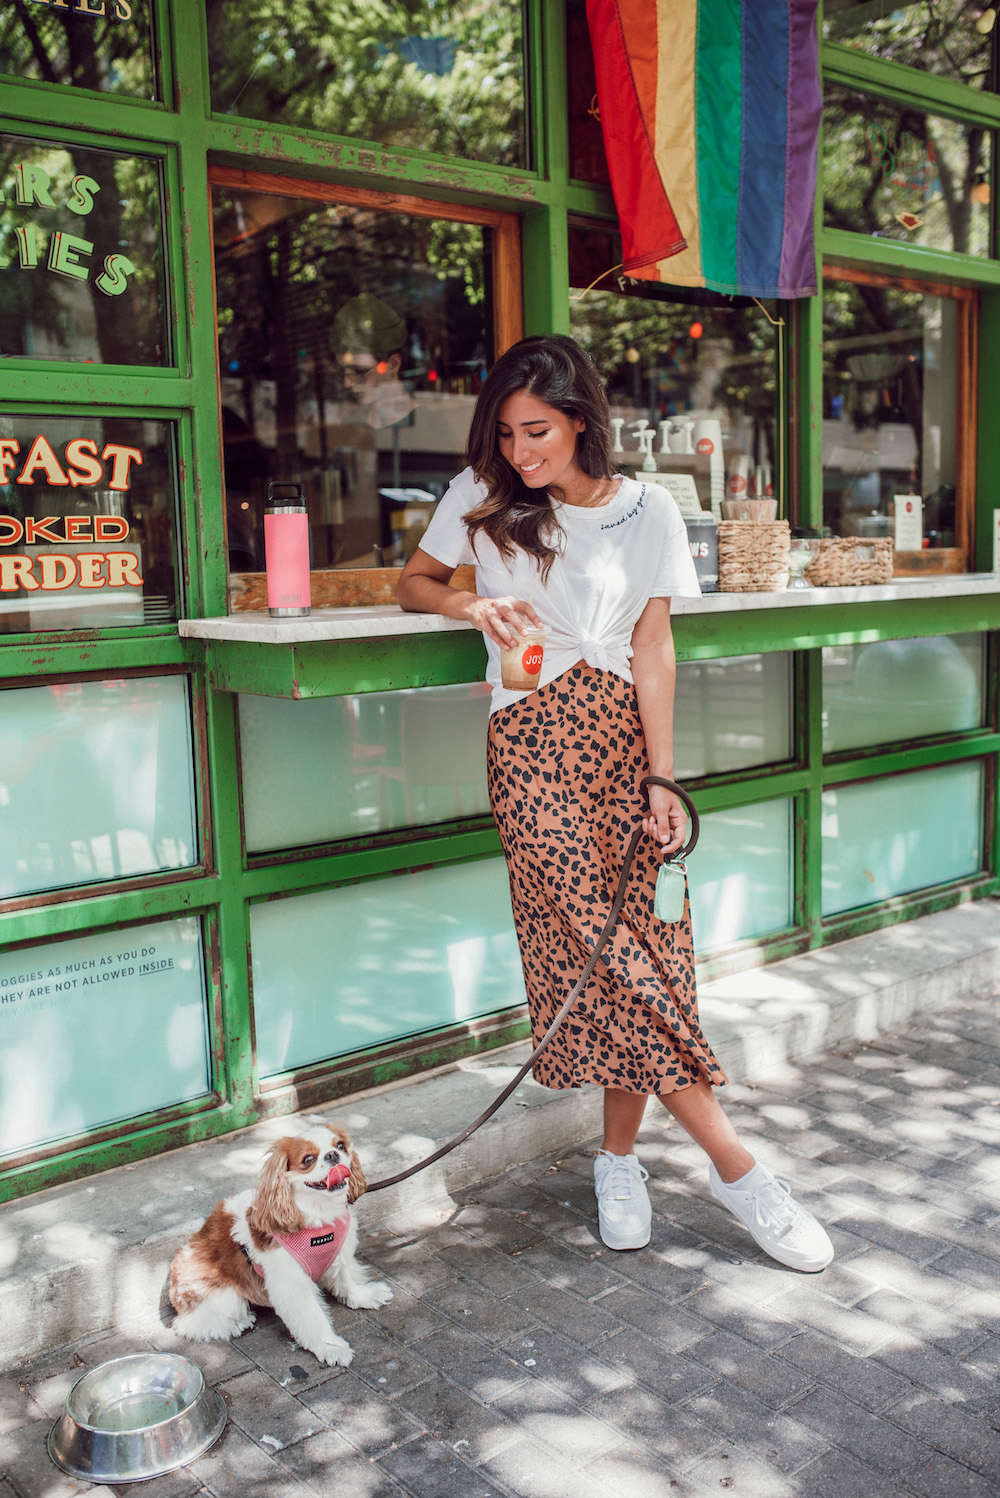 jessi afshin's personal style with her dog chloe